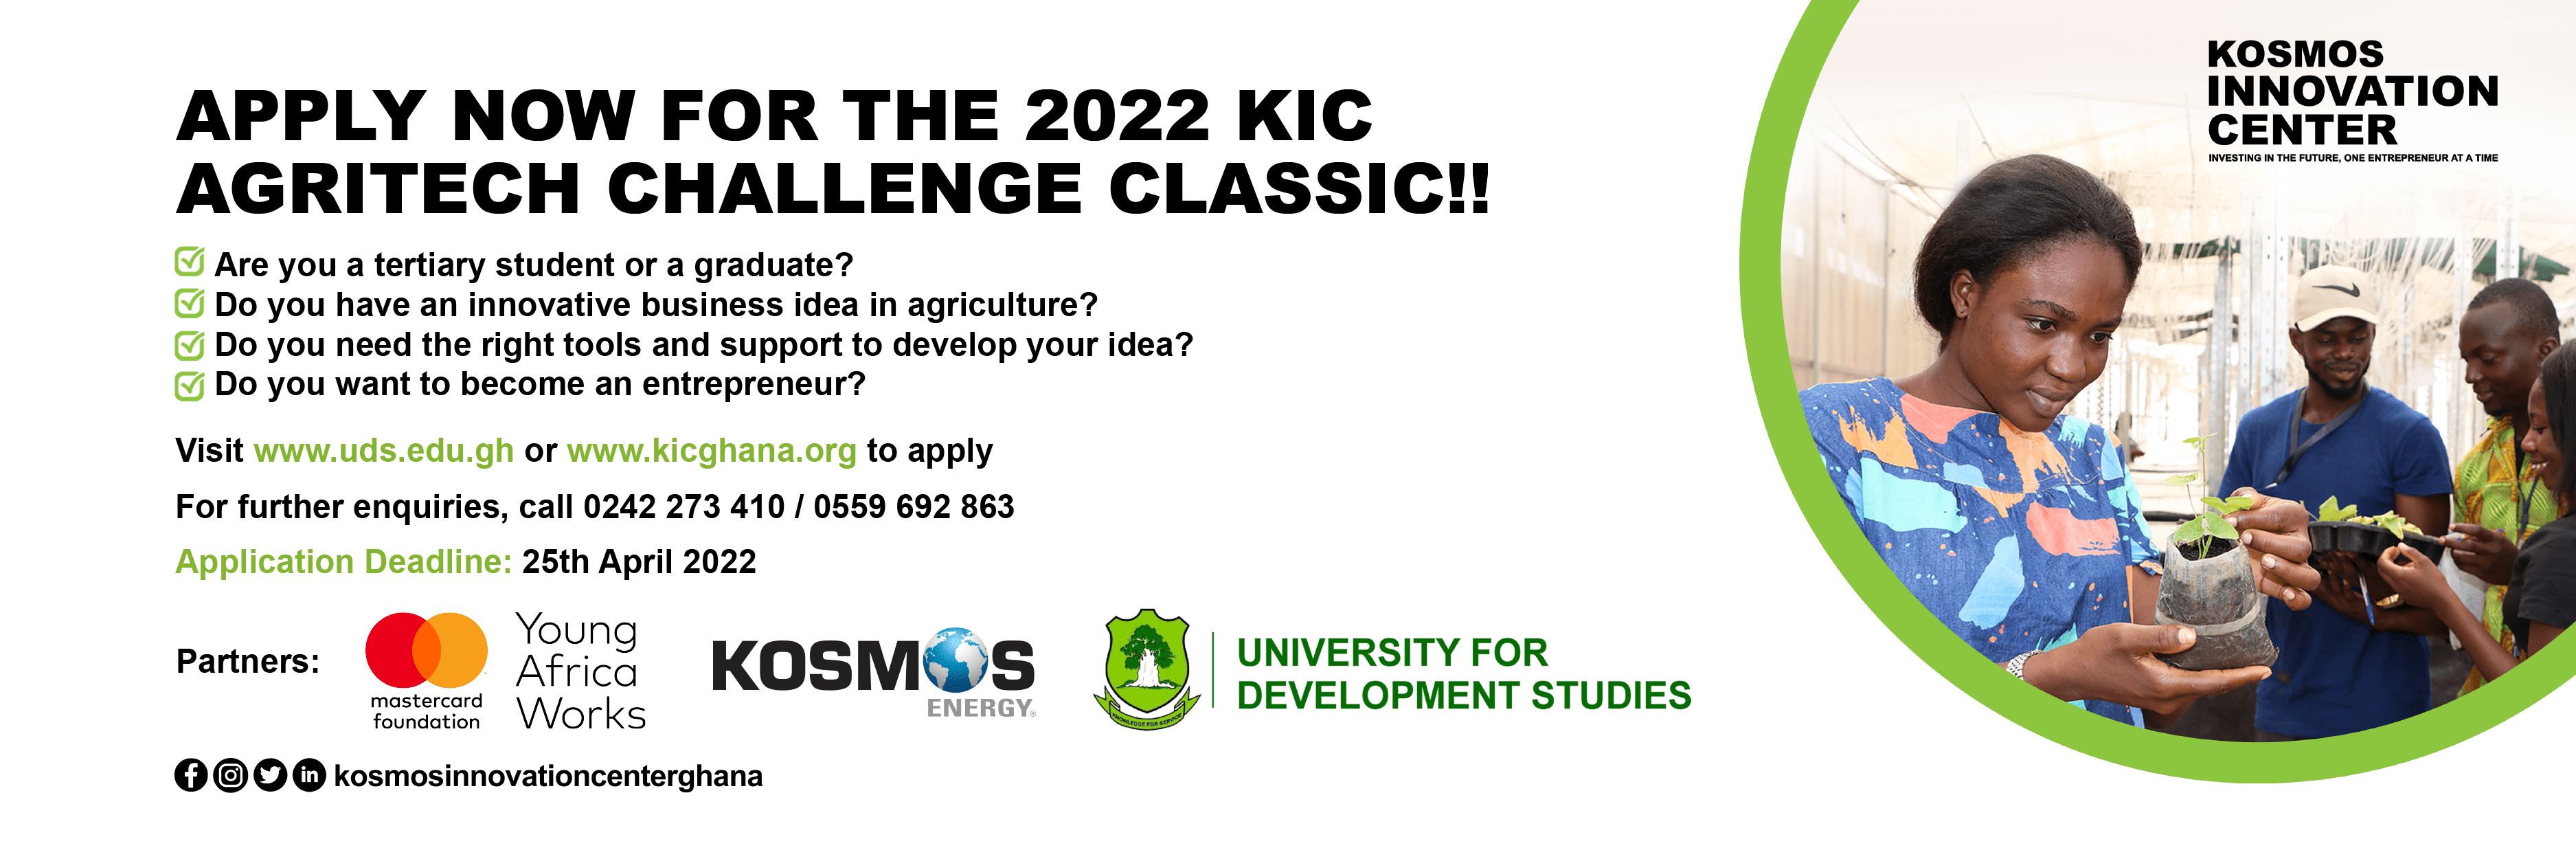 Applications Open for The 2022 KIC AgriTech Challenge Classic